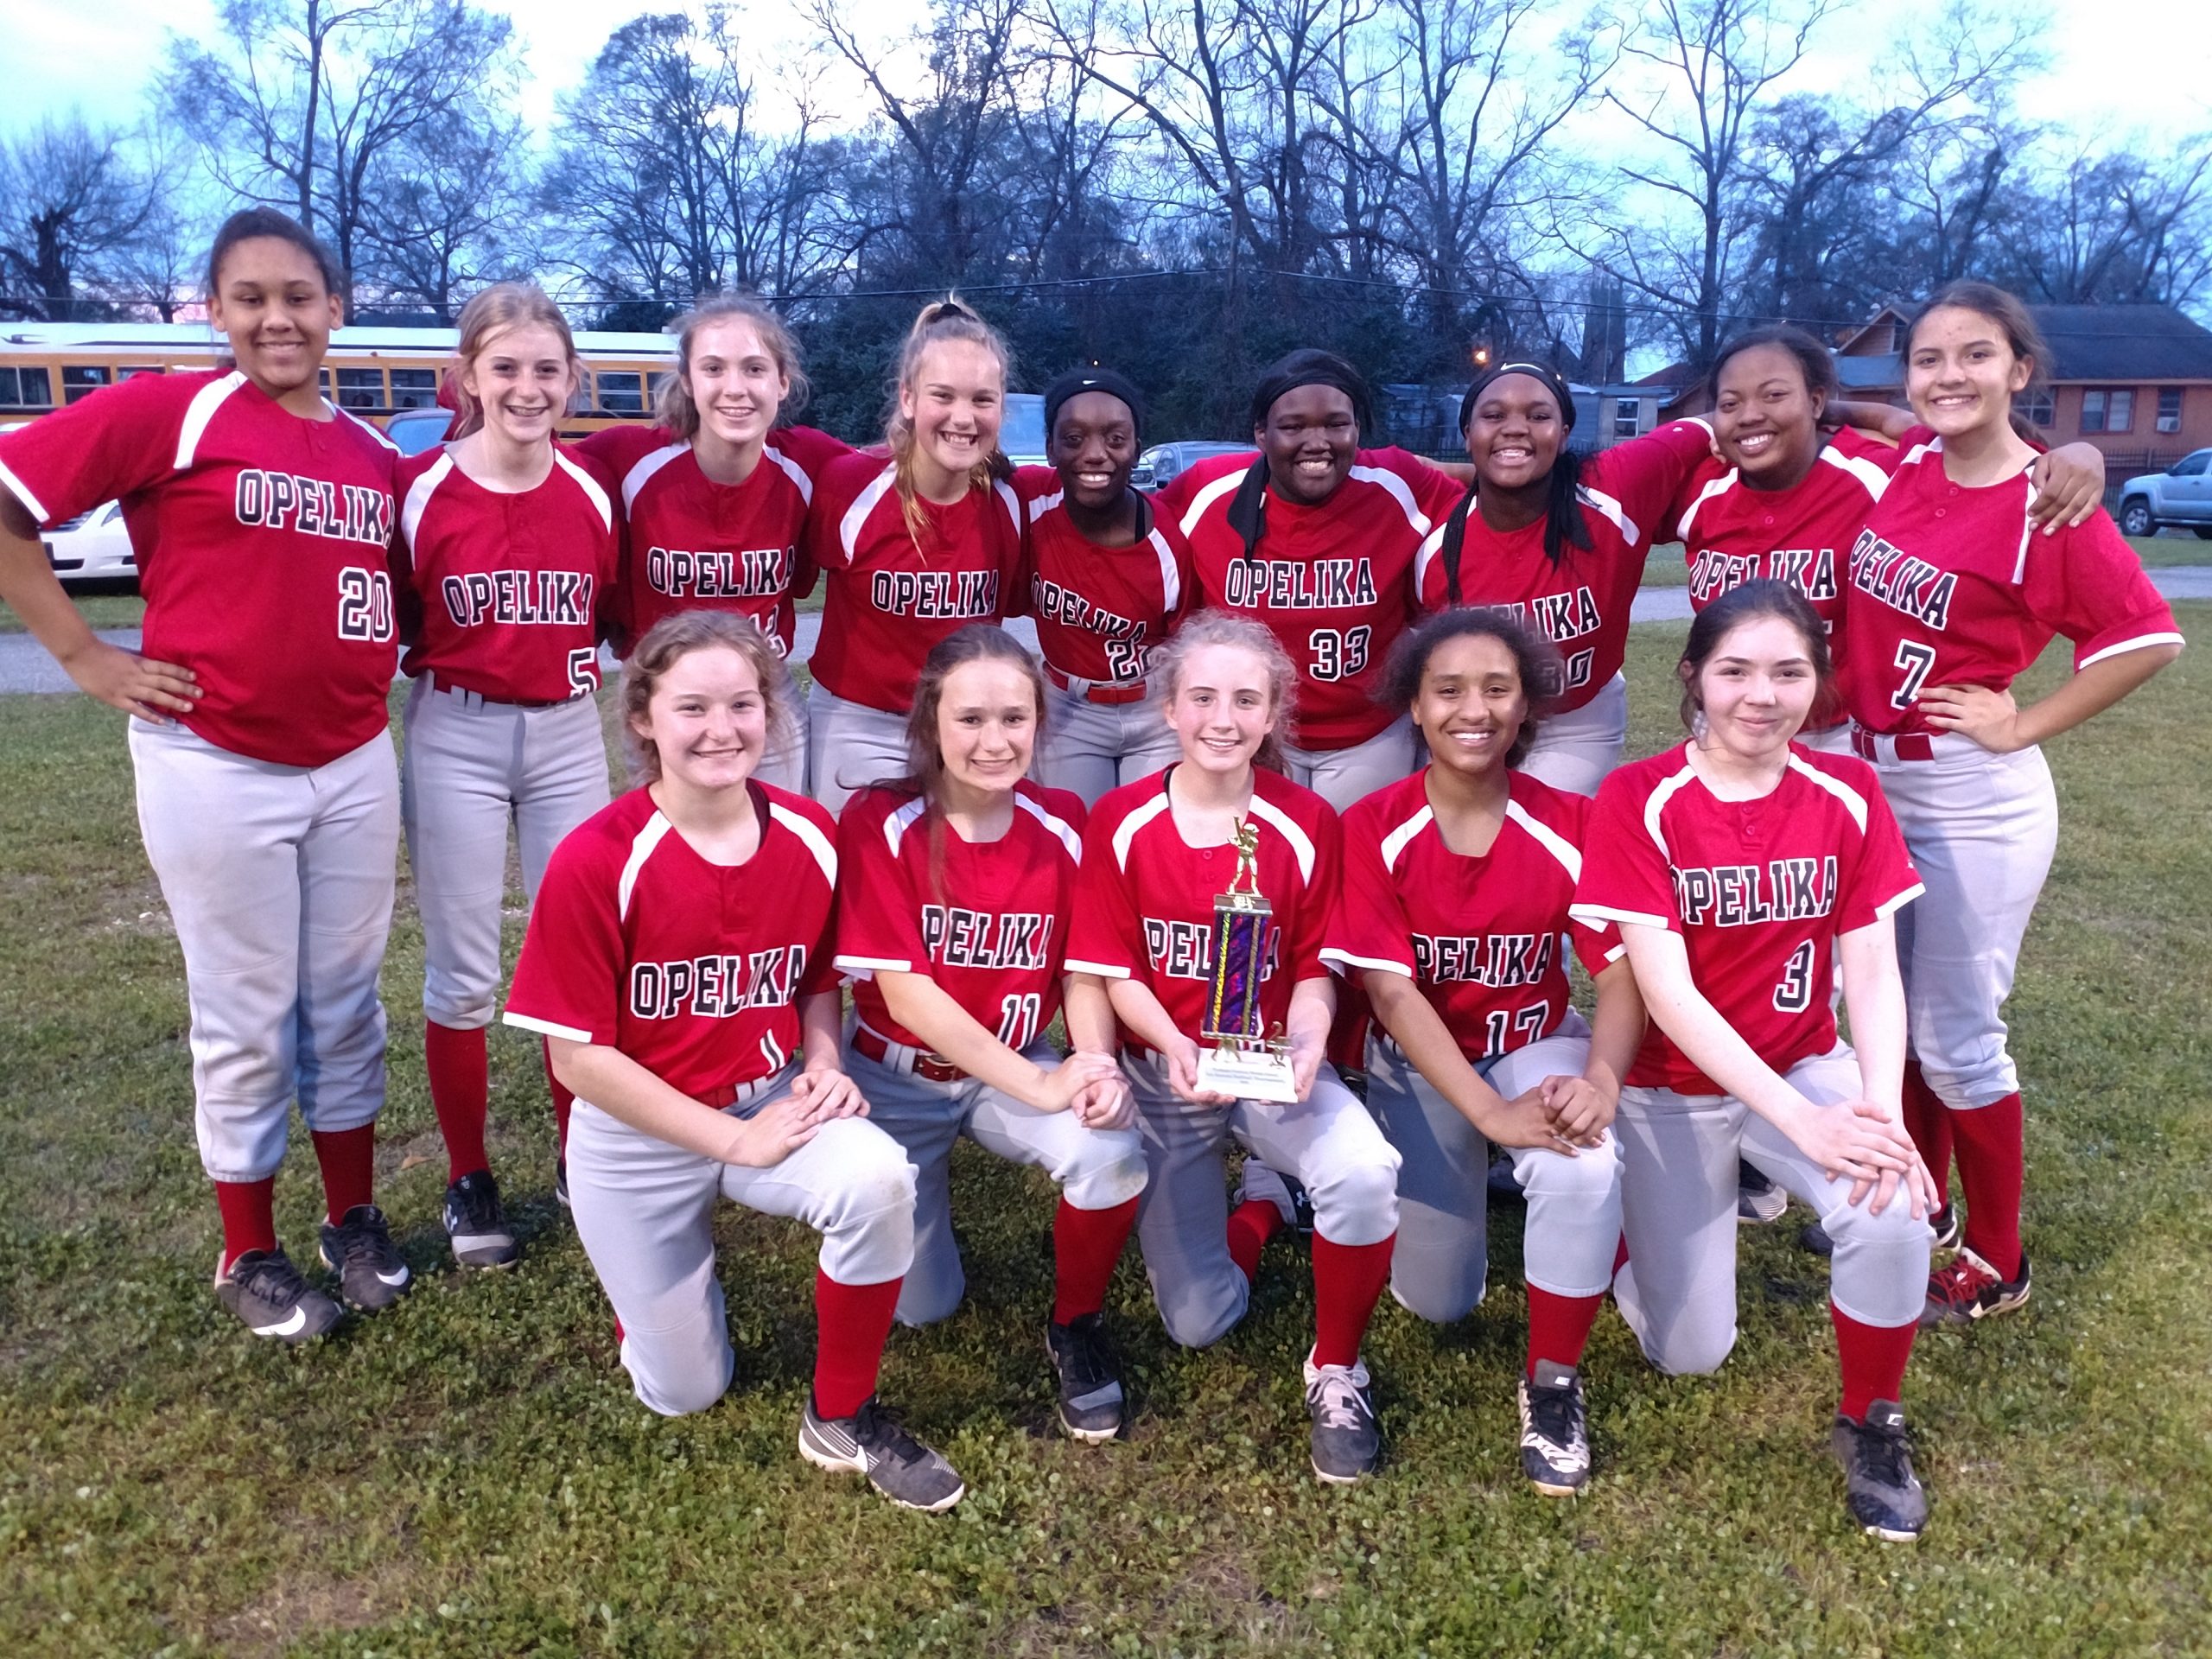 Opelika Middle School’s softball team finishes with 4-5 mark